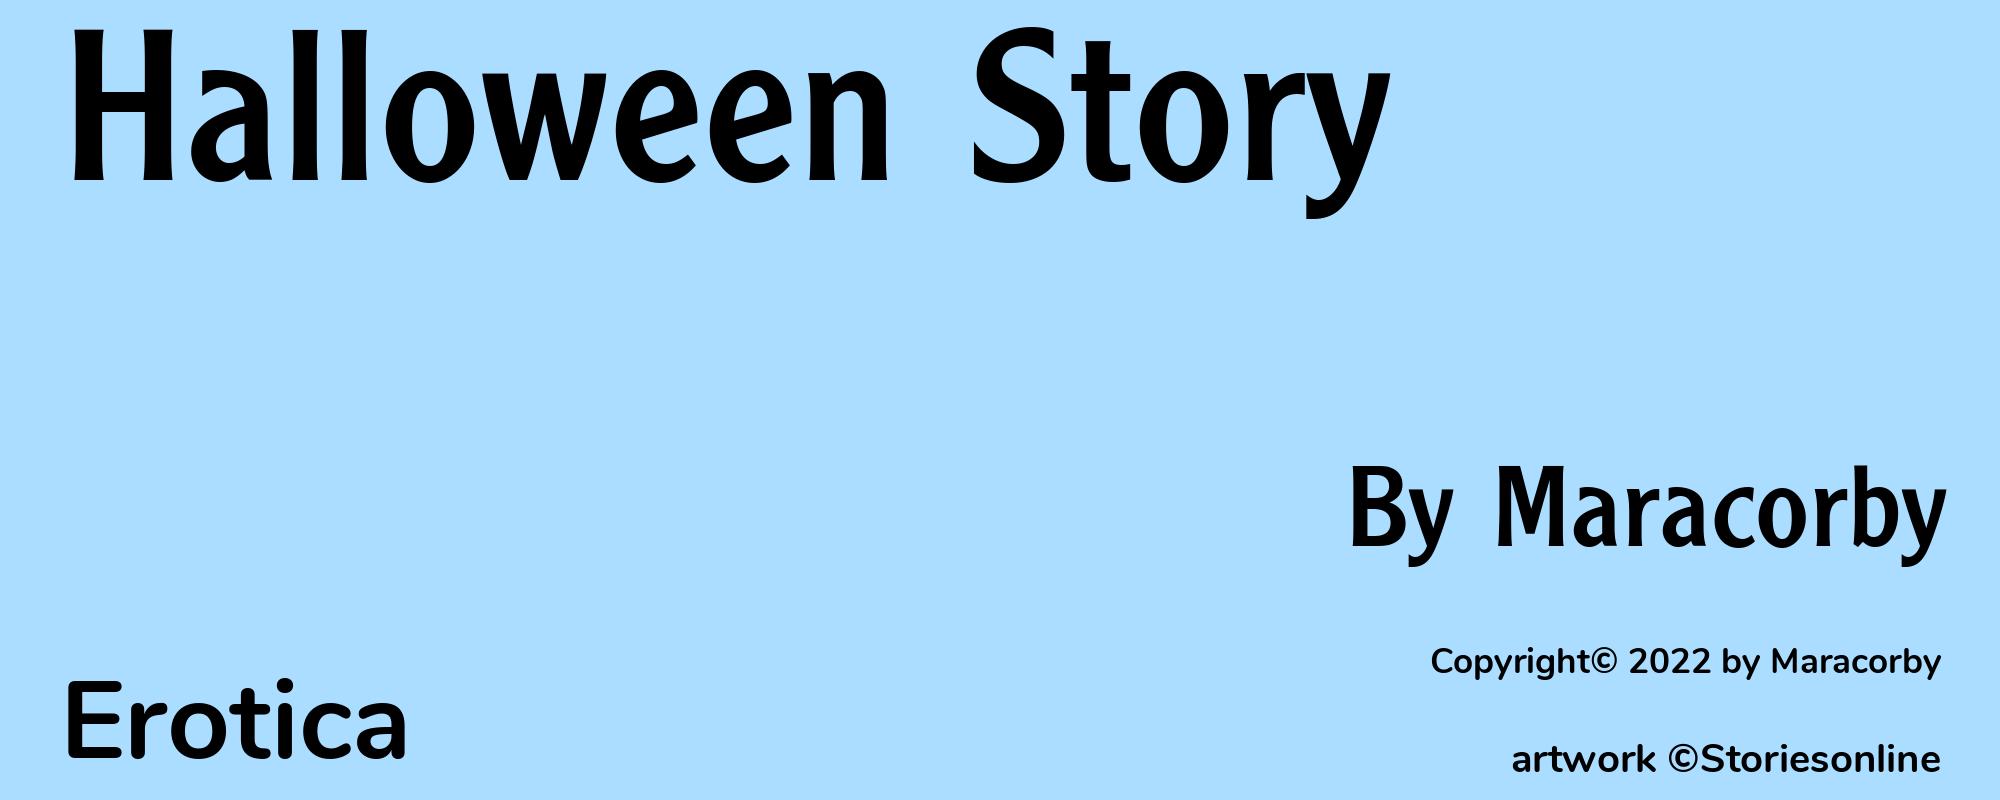 Halloween Story - Cover